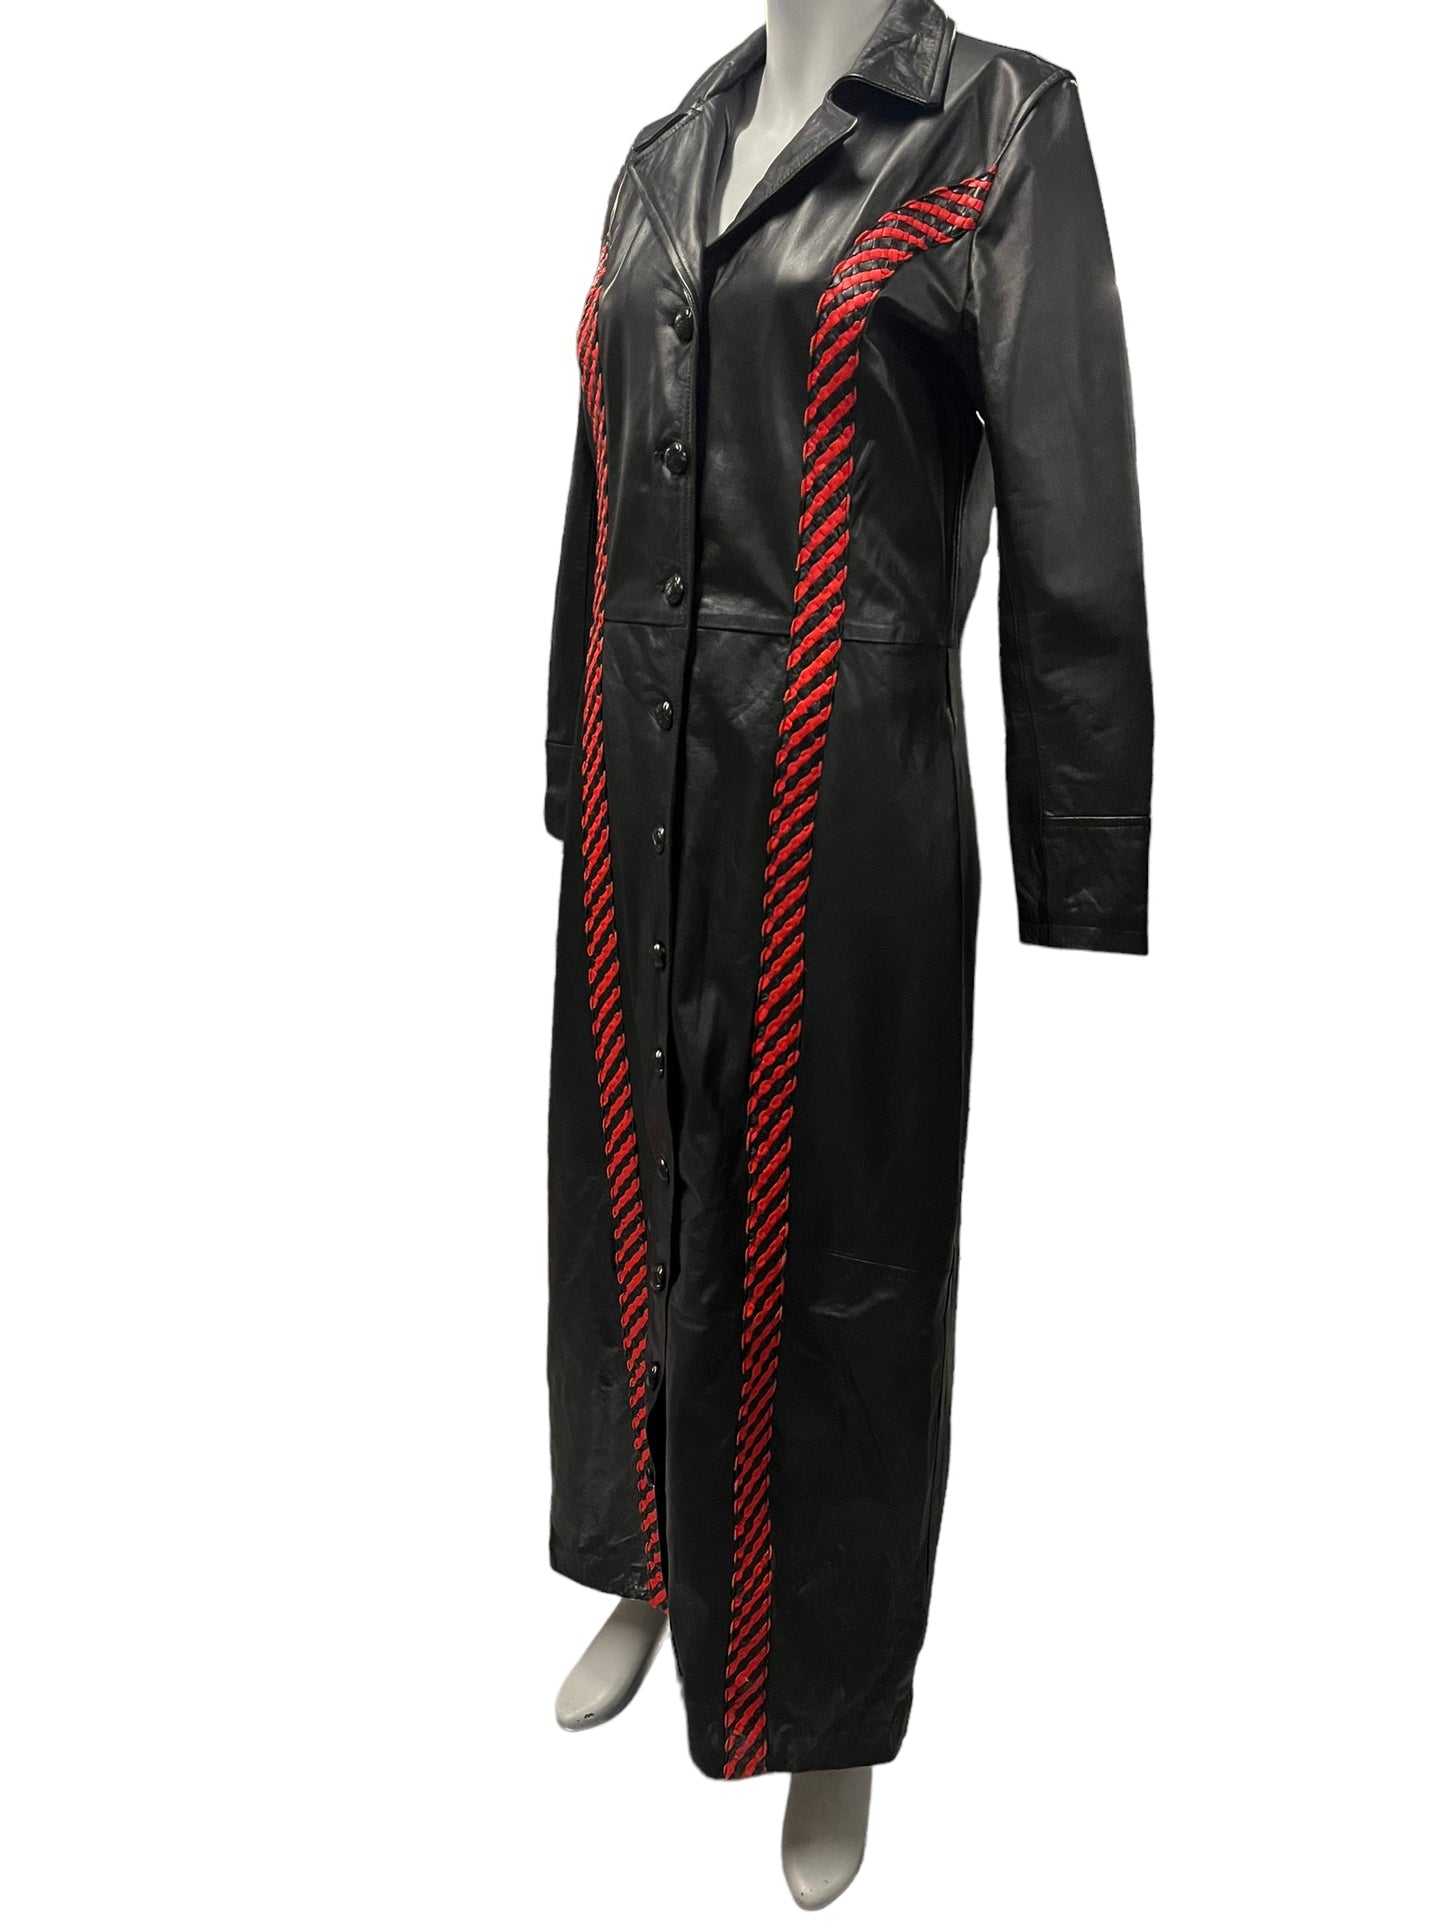 Fashion World - LL153 - Black Long Coat With Red Accents